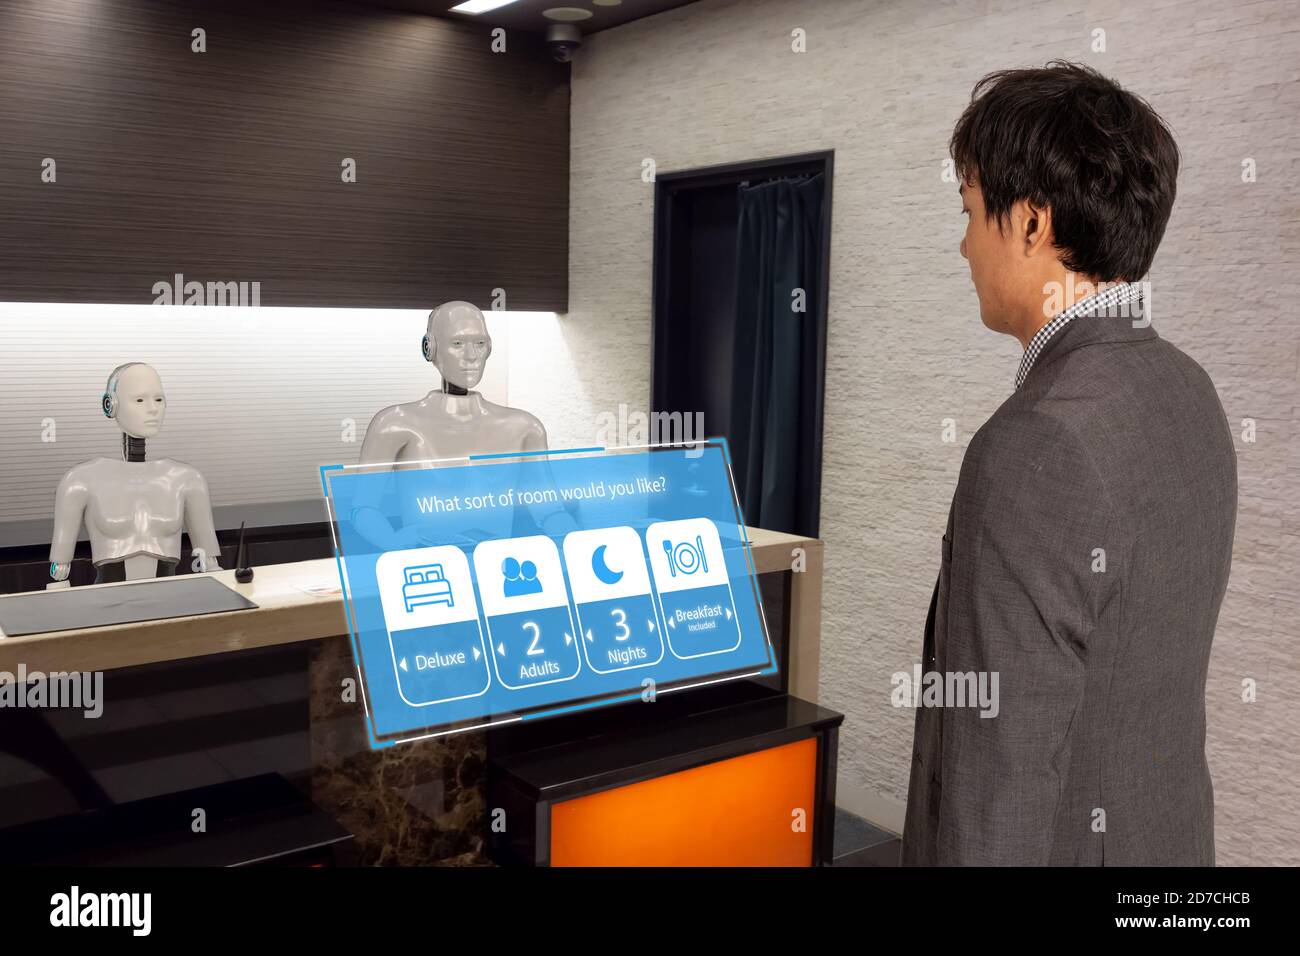 smart hotel in hospitality industry 4.0  concept, the receptionist robot (robot assistant ) in lobby of hotel or airports always welcome customer the Stock Photo